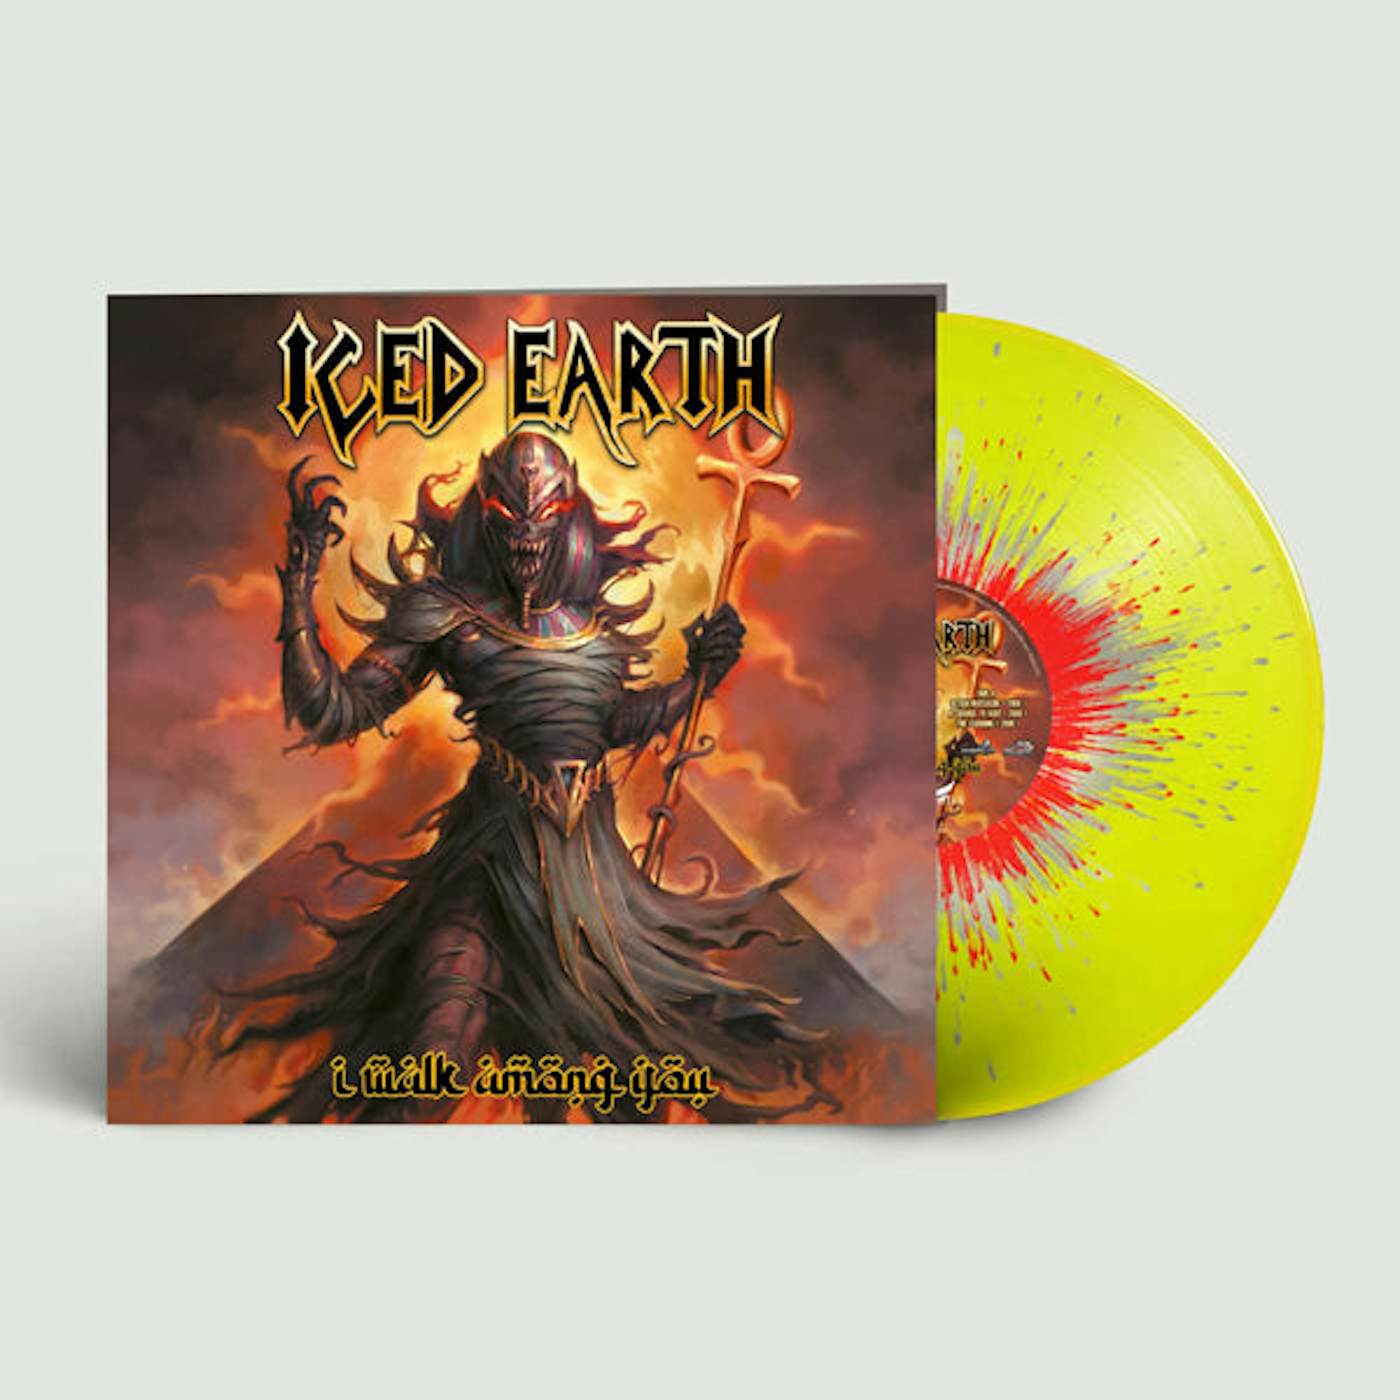 Iced Earth LP - I Walk Among You (Yellow/Red/Silver Vinyl)